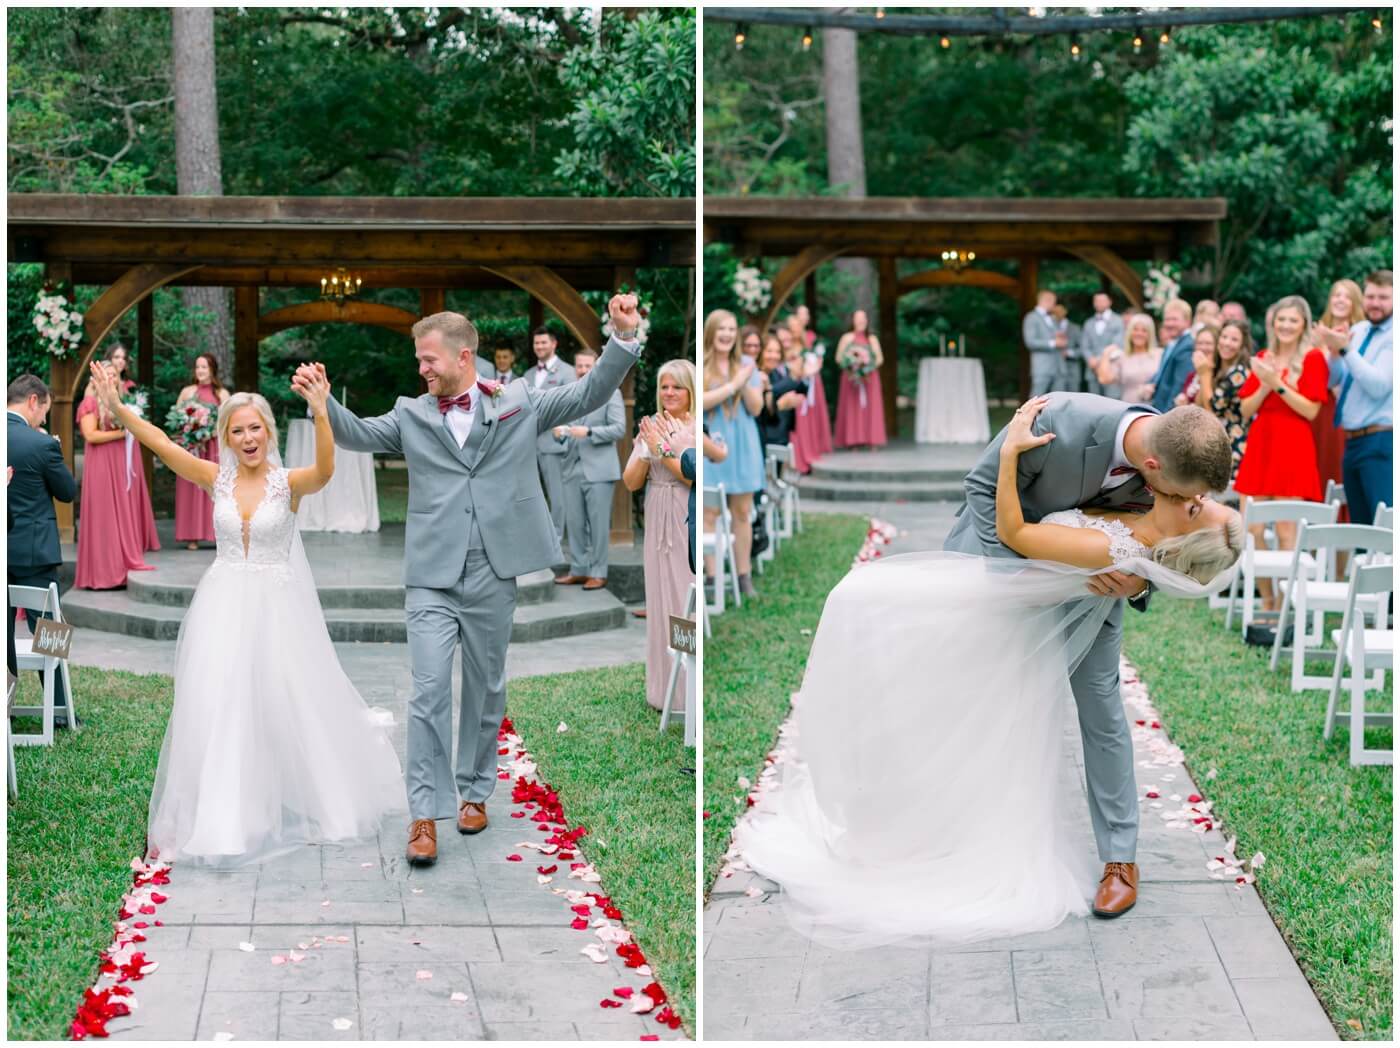 the groom dips his bride and kisses her in the aisle 